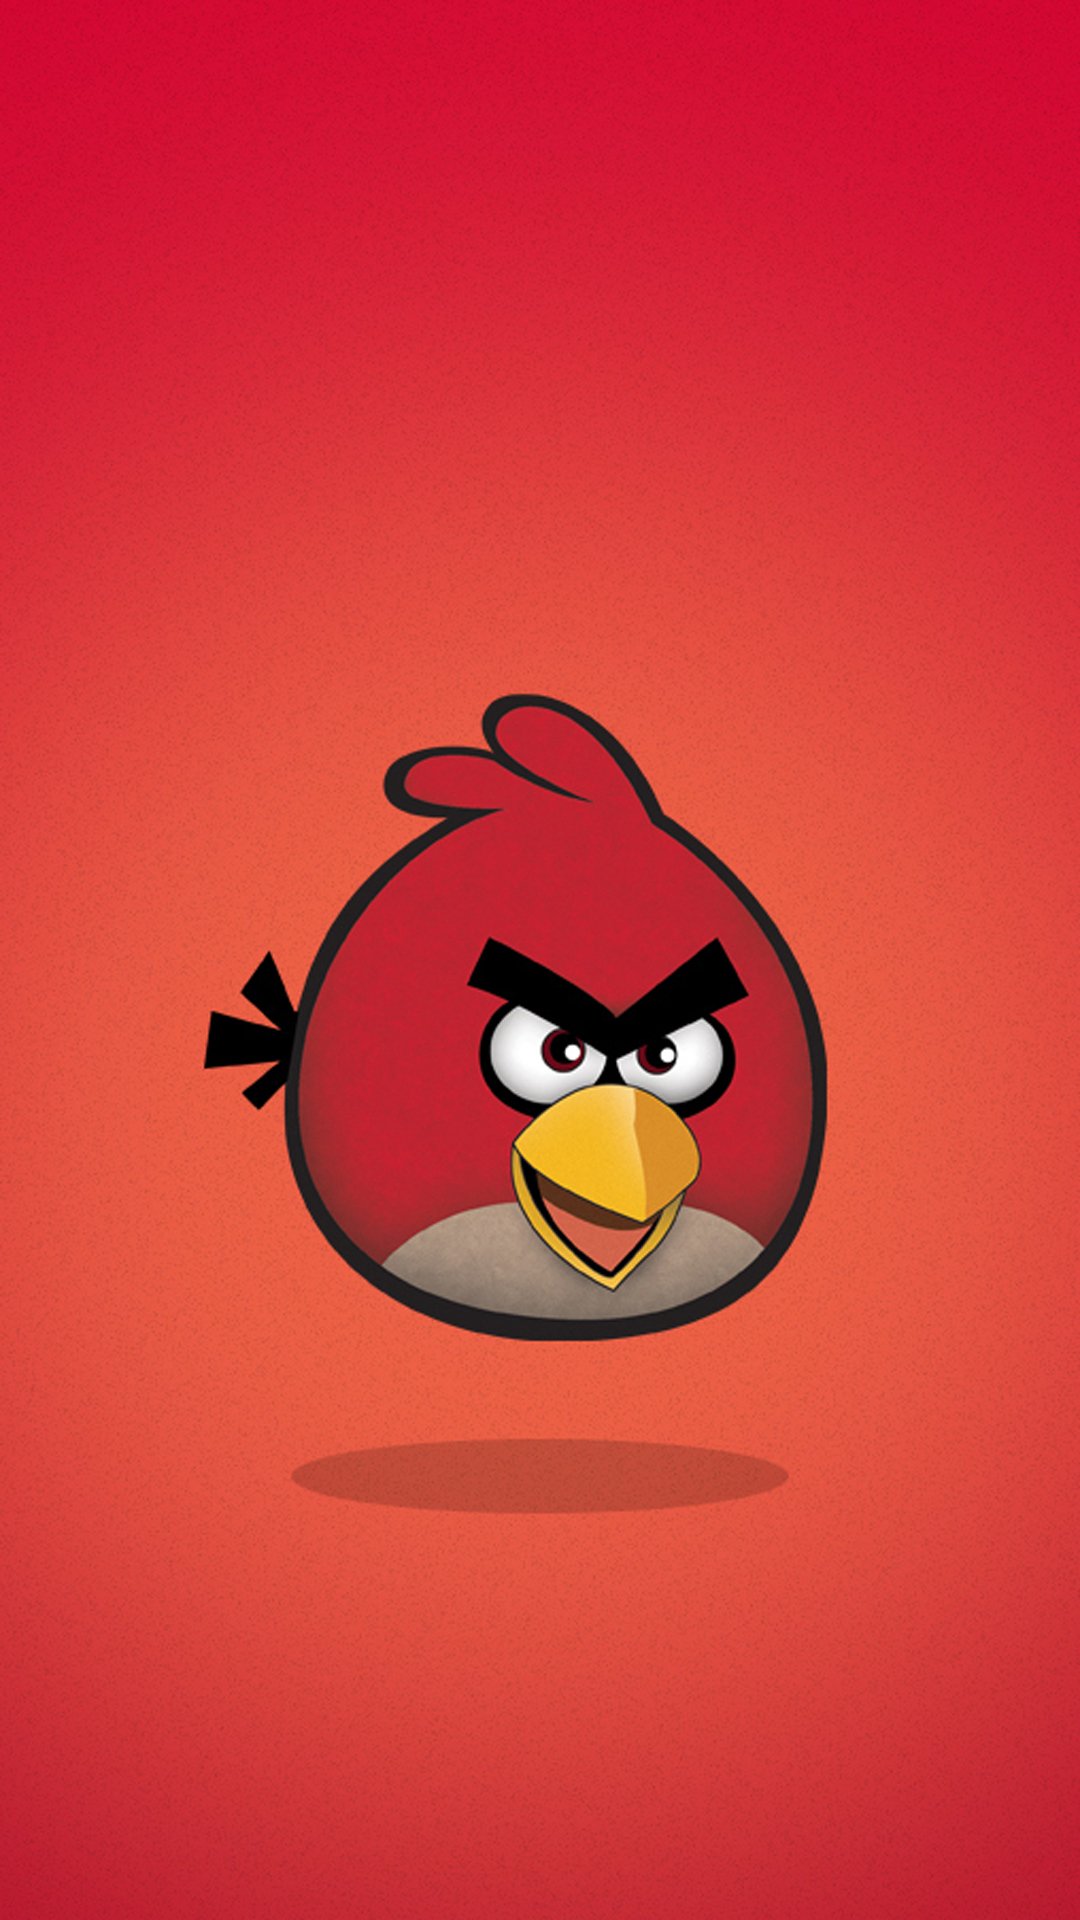 Angry BirdsK wallpaper, free and easy to download